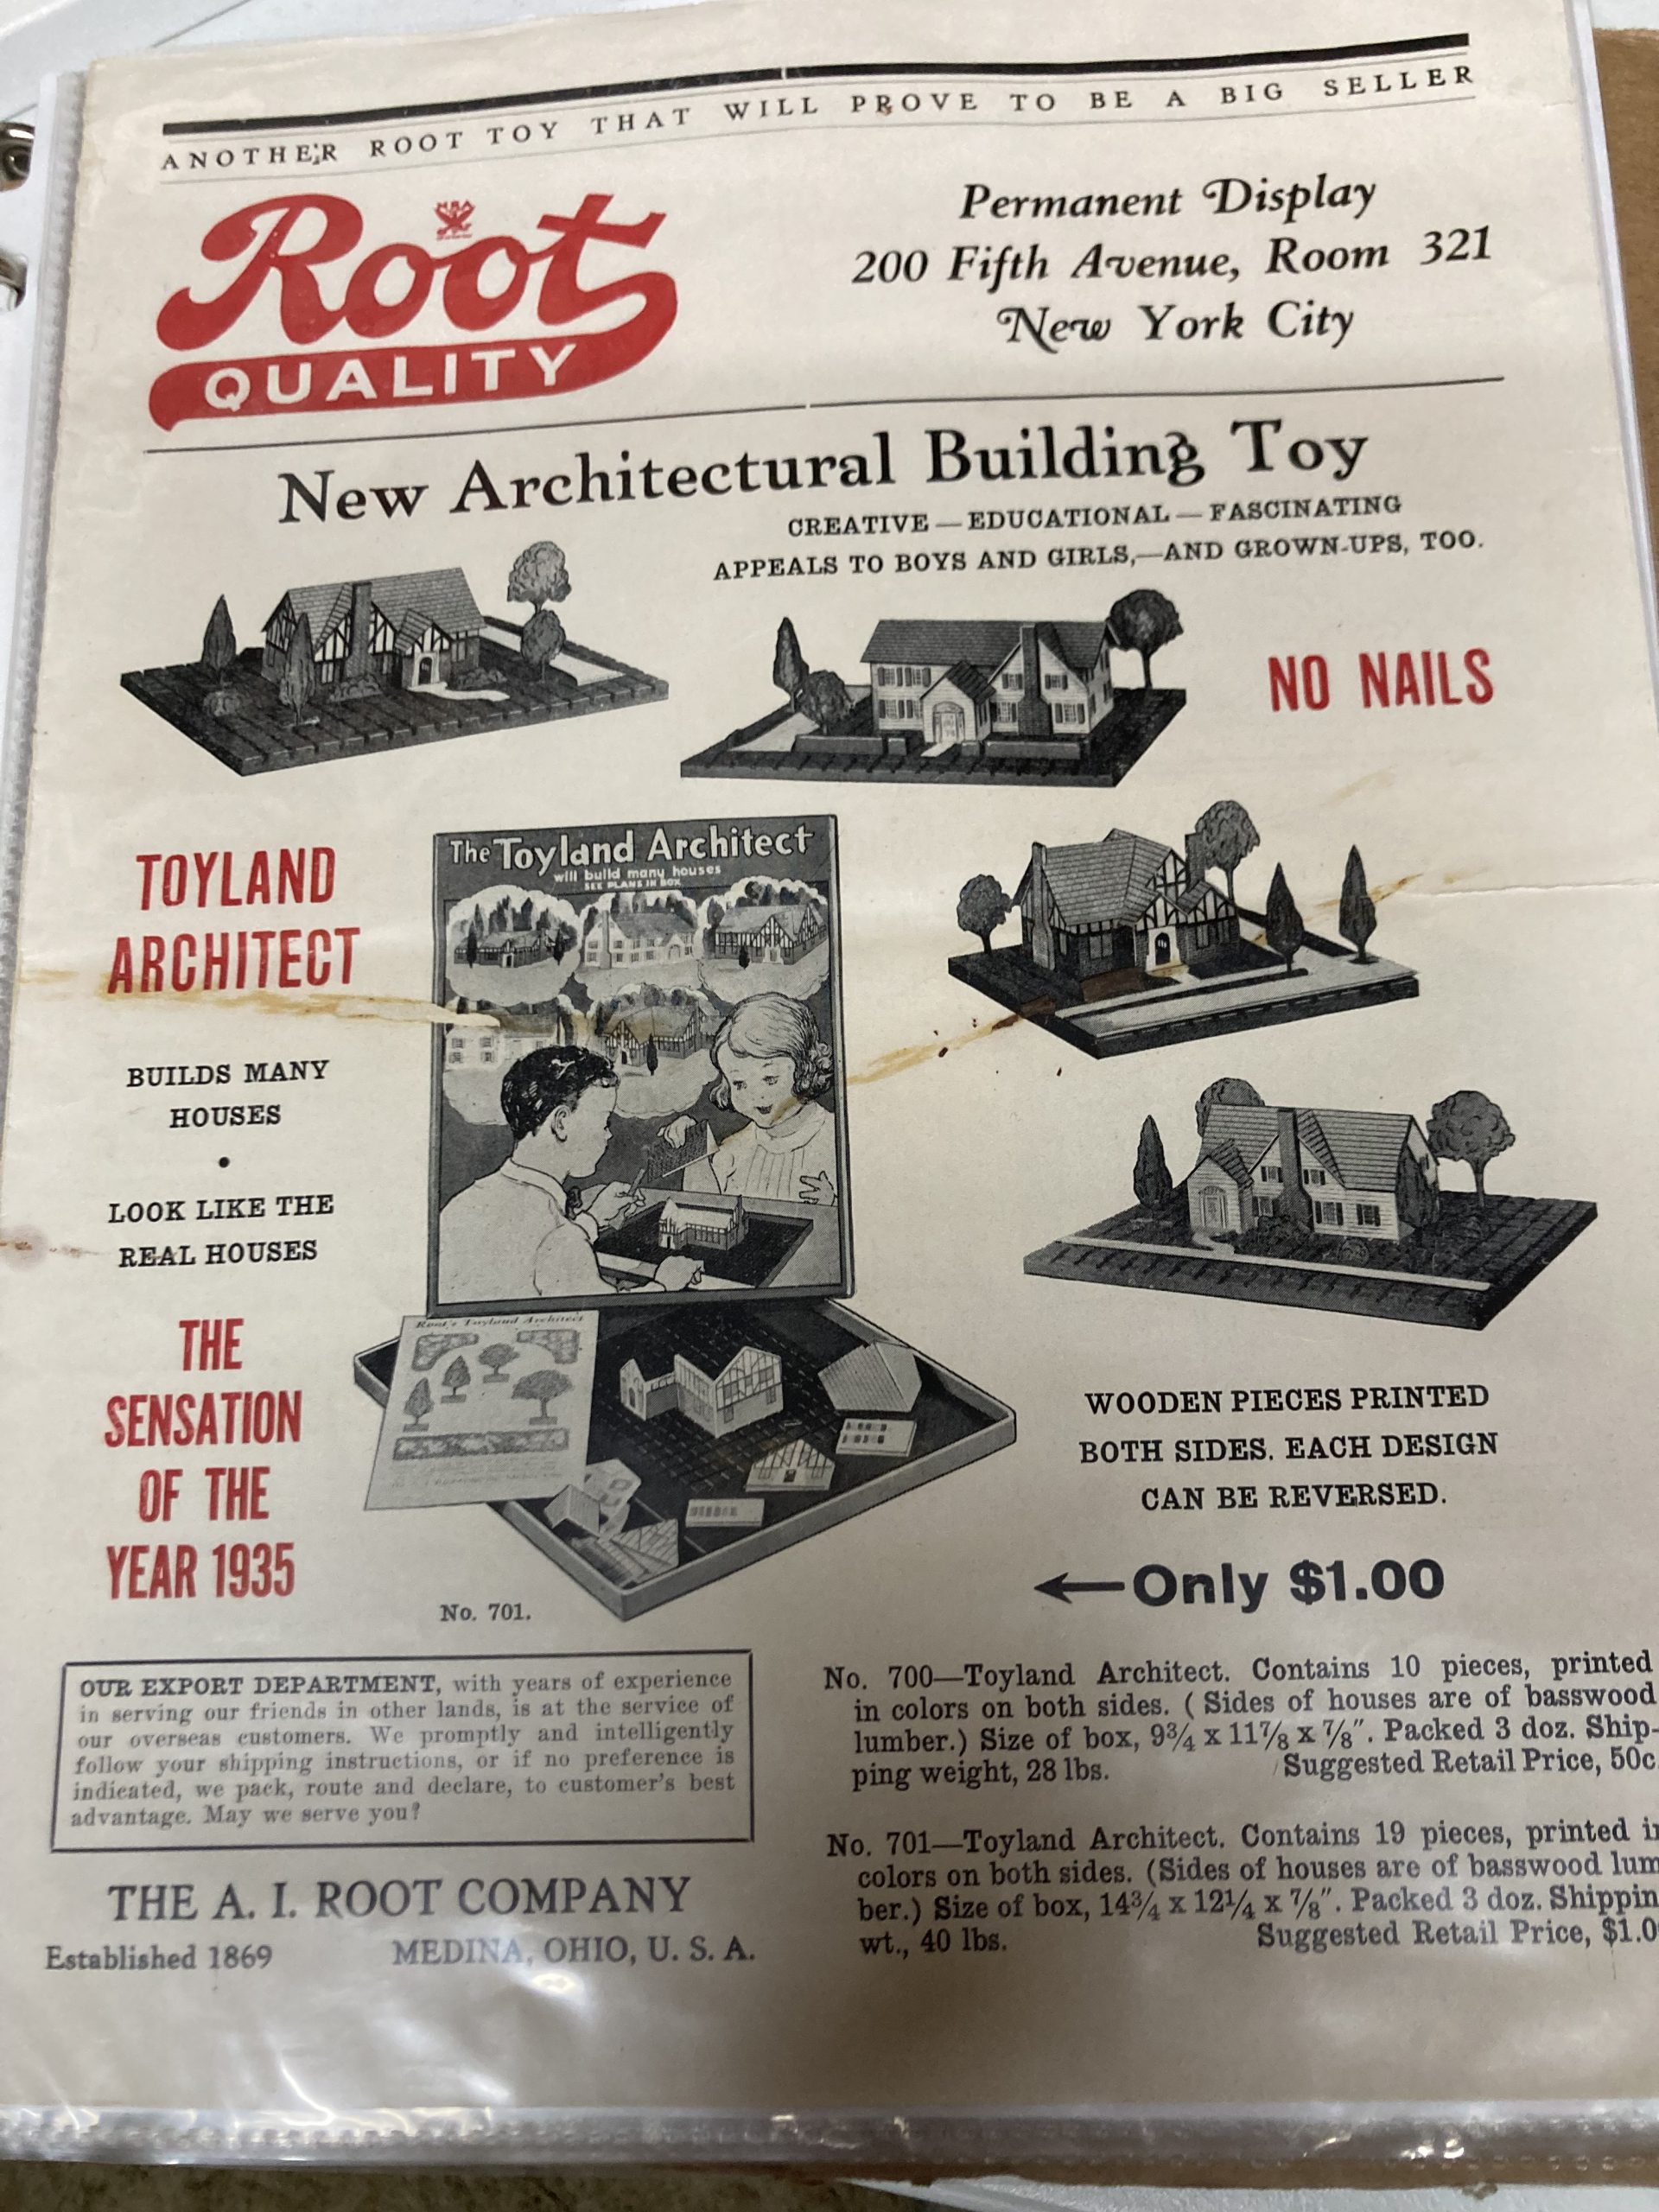 In the 1950’s, A. I. Root made toys along with other items that were not related to honey bees and beekeeping.